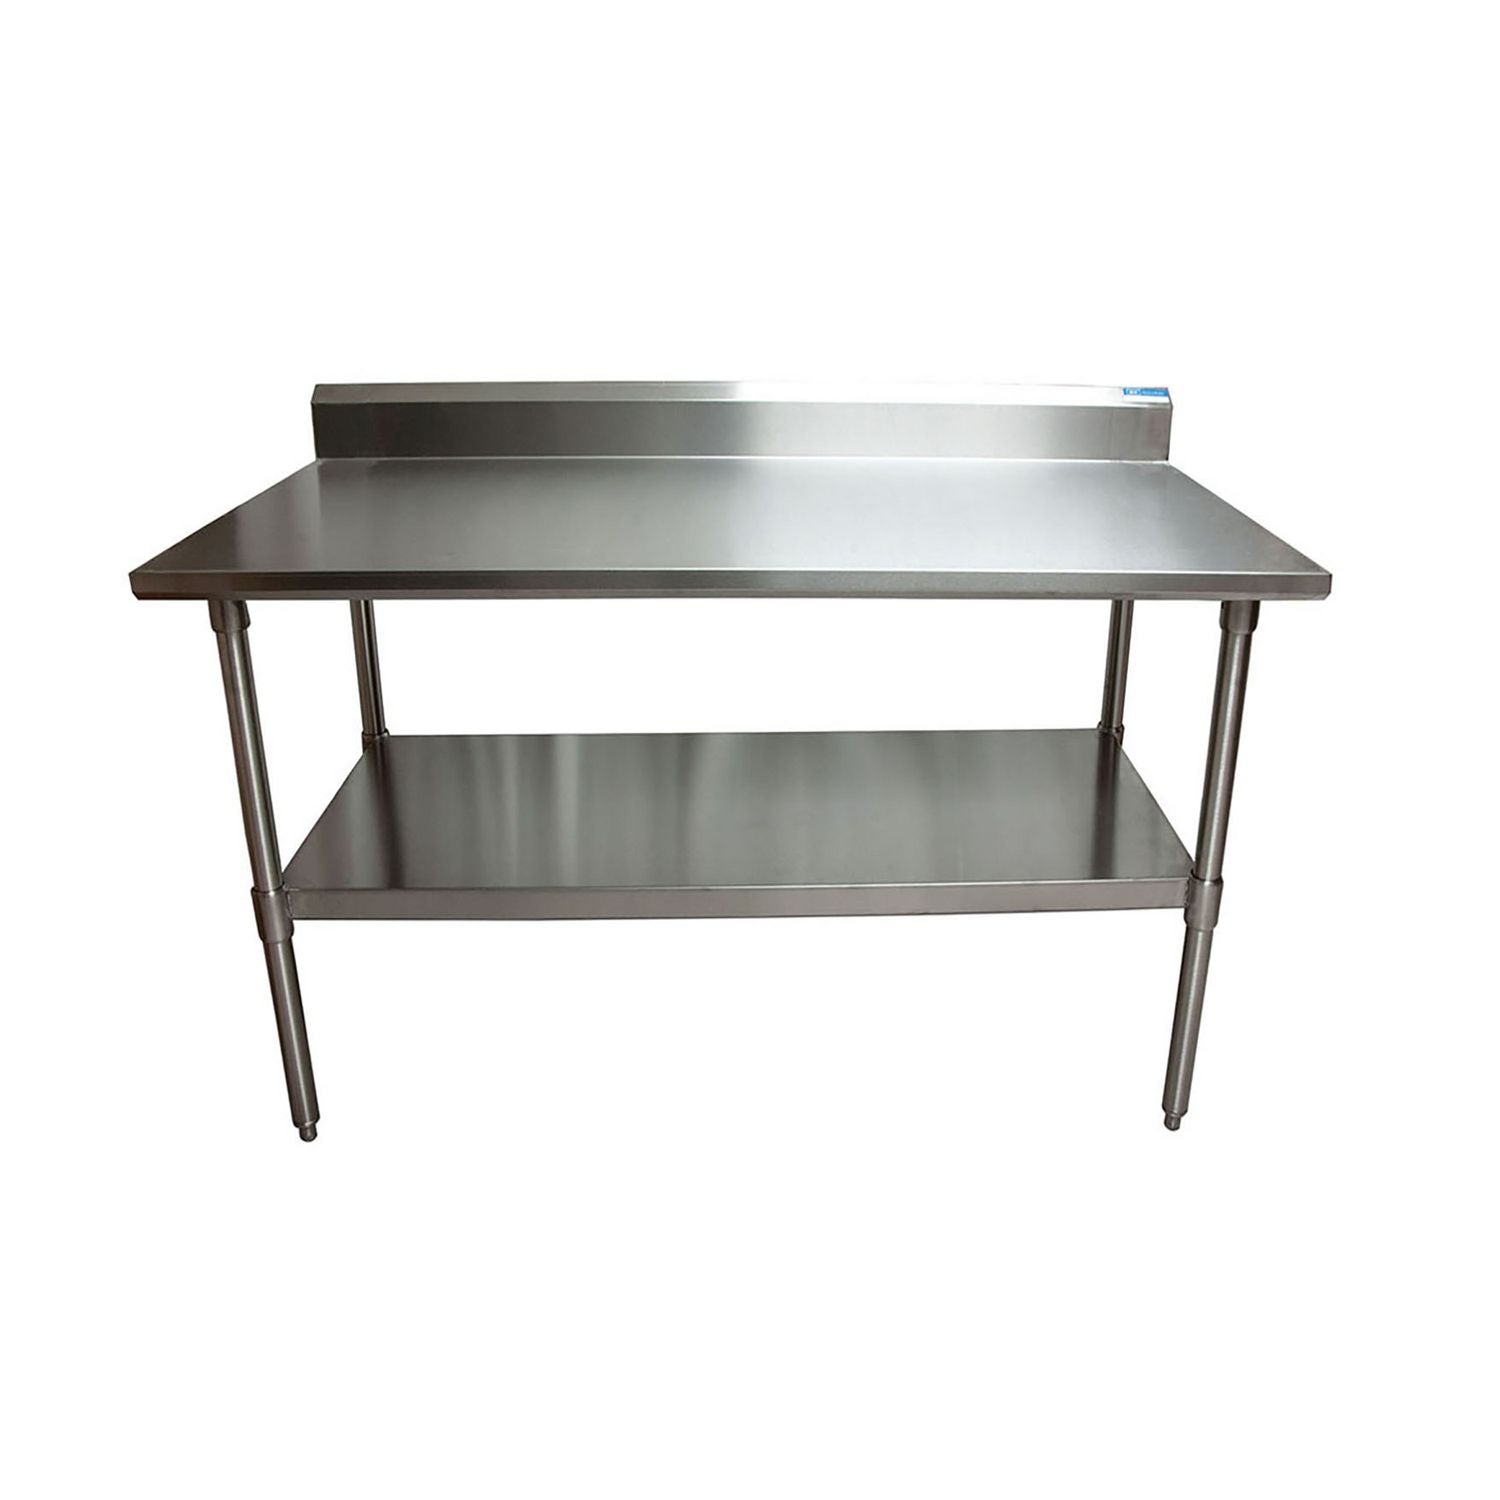 stainless-steel-5-riser-top-tables-60w-x-30d-x-3975h-silver-2-pallet-ships-in-4-6-business-days_bke2vtr56030 - 7